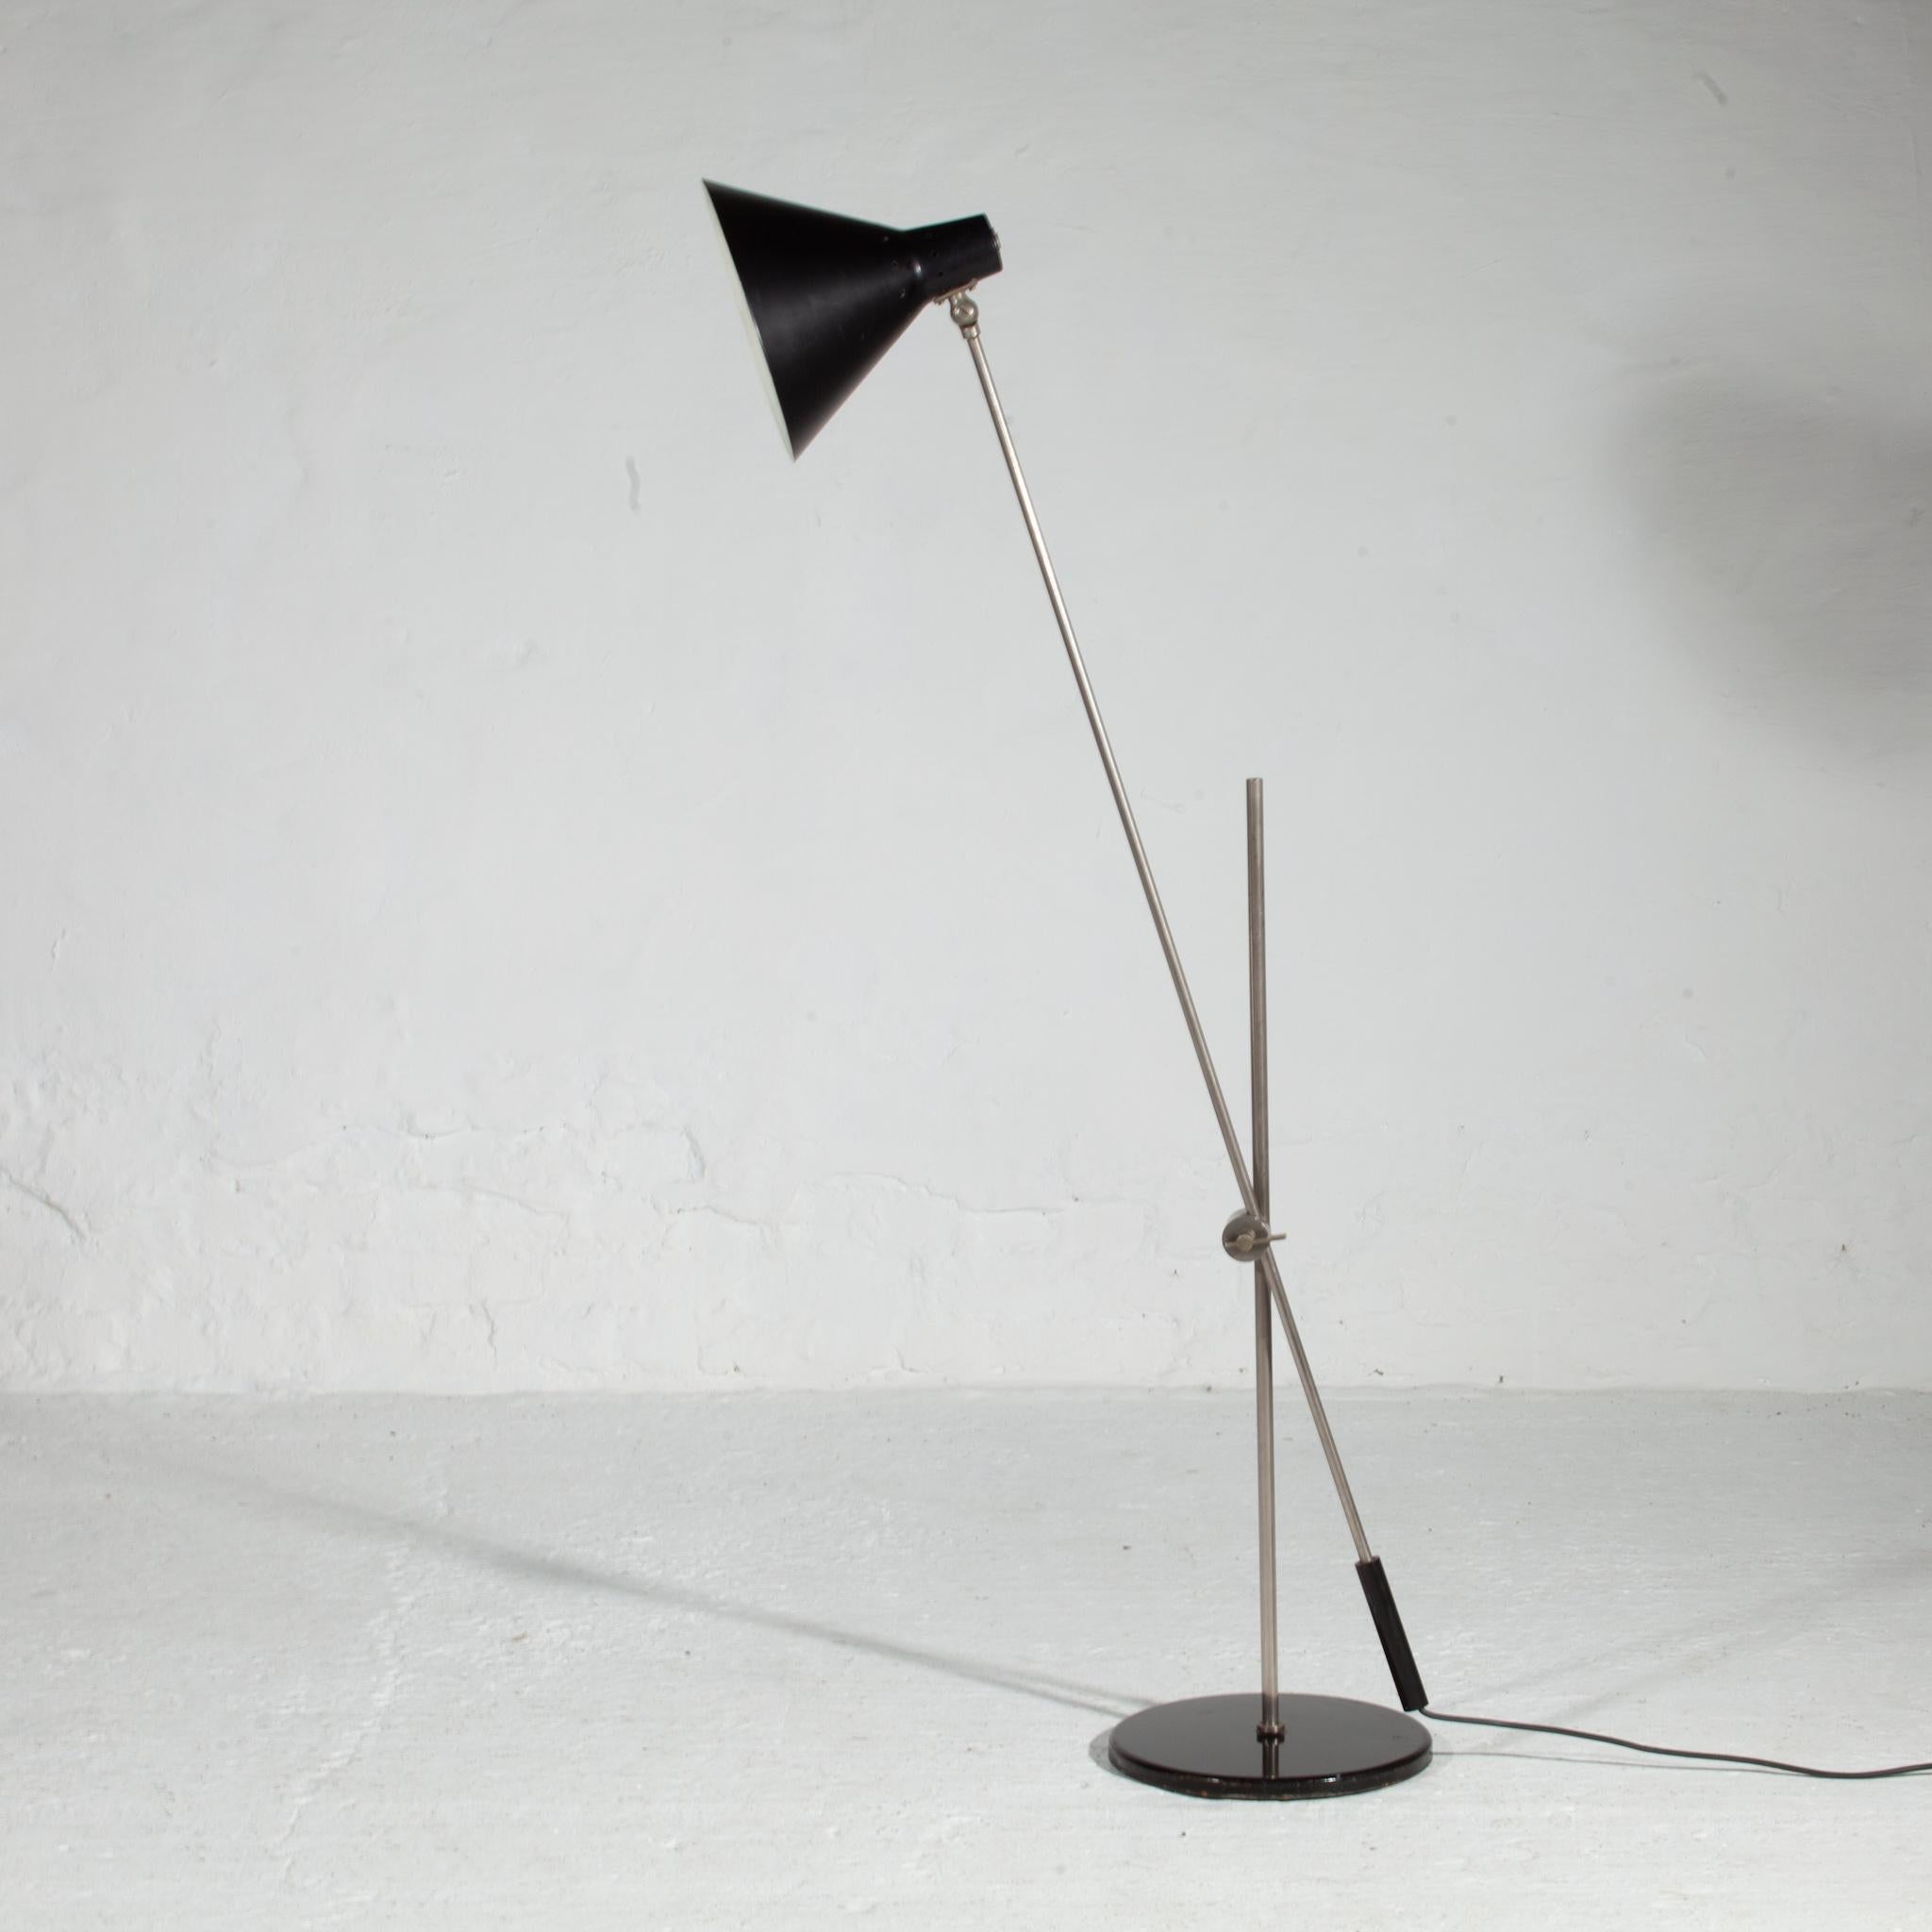 Vintage Artiforte floor-lamp, model ST416, designed by H.Fillekes in 1960 An early Dutch mid-century floor-lamp a fine example of classic understated Dutch modernist design. The heavily weighted base allows the lamp to balance in any position round,